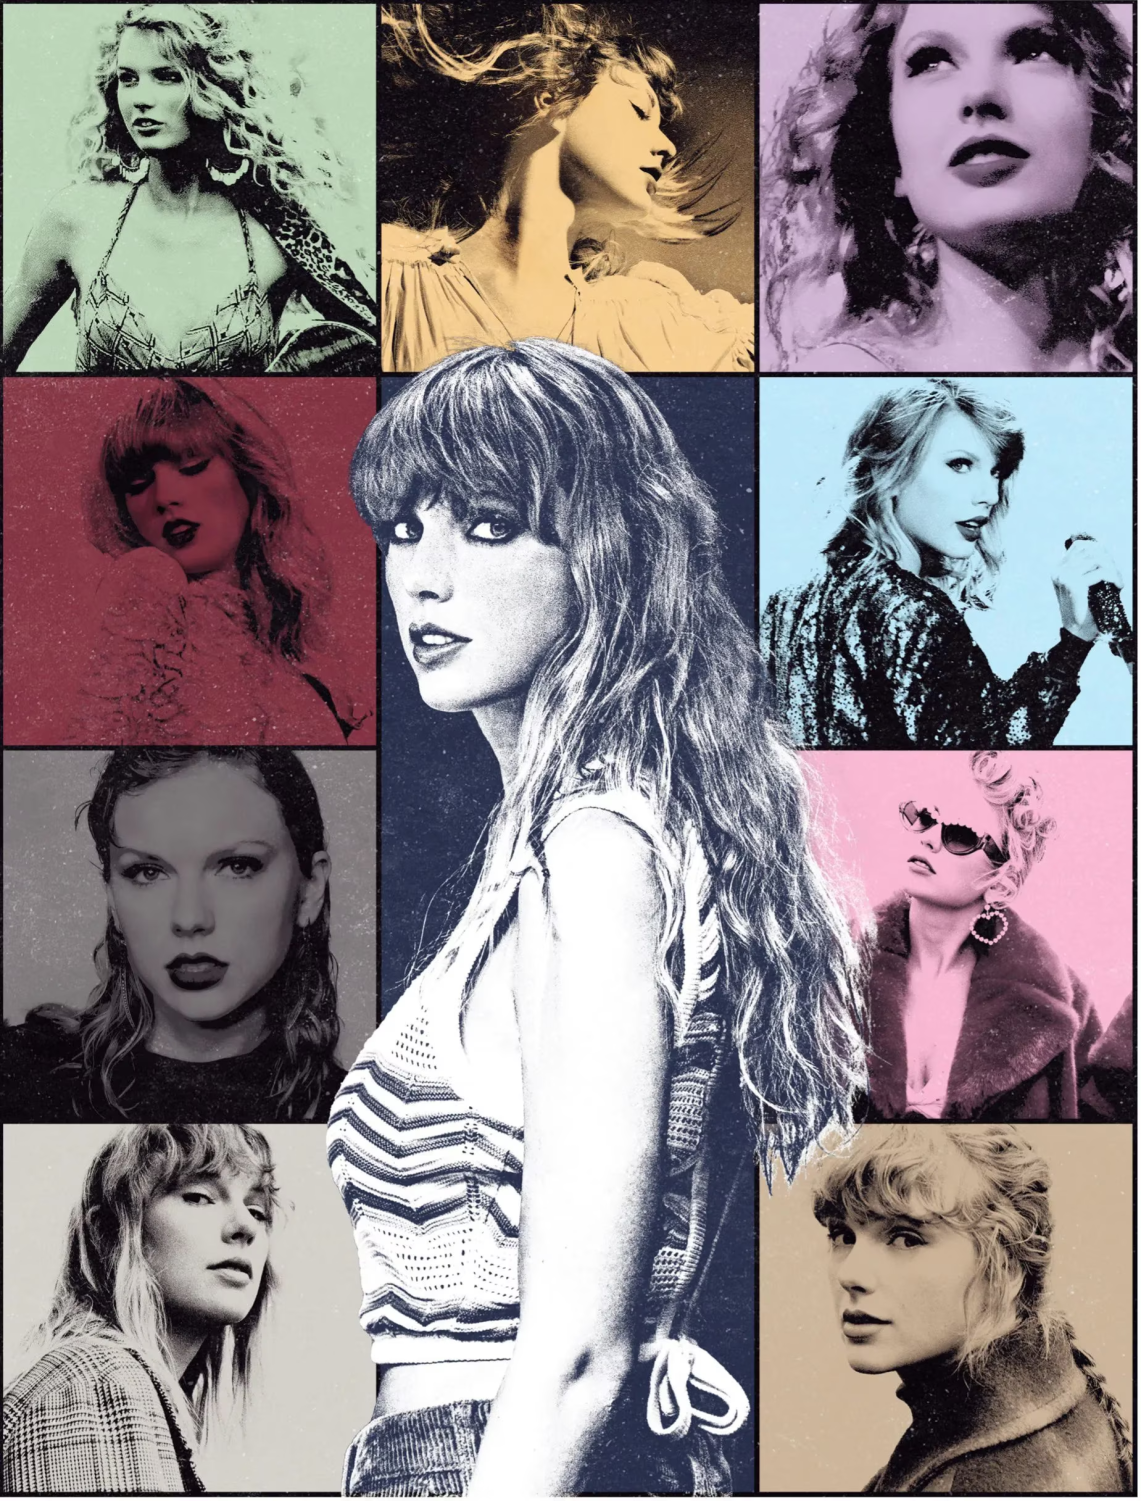 Taylor swift poster 